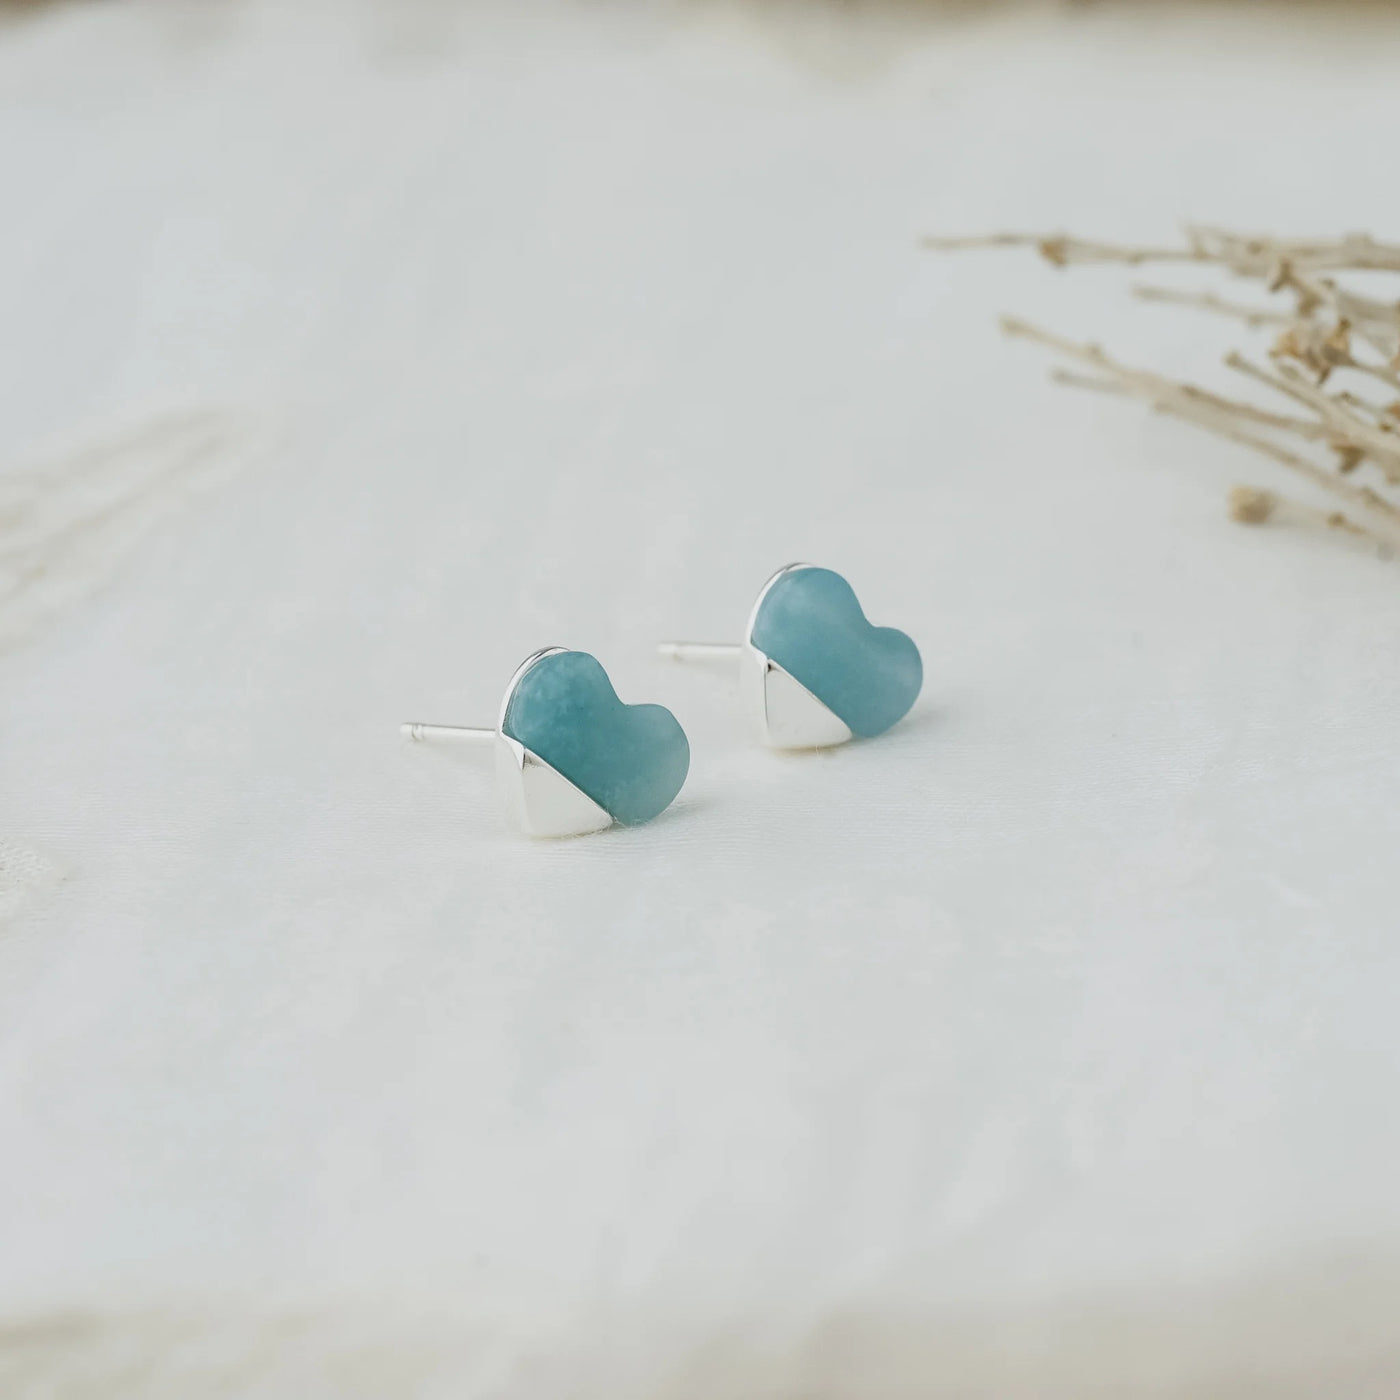 FULL HEART AMAZONITE STUDS - gold or silver